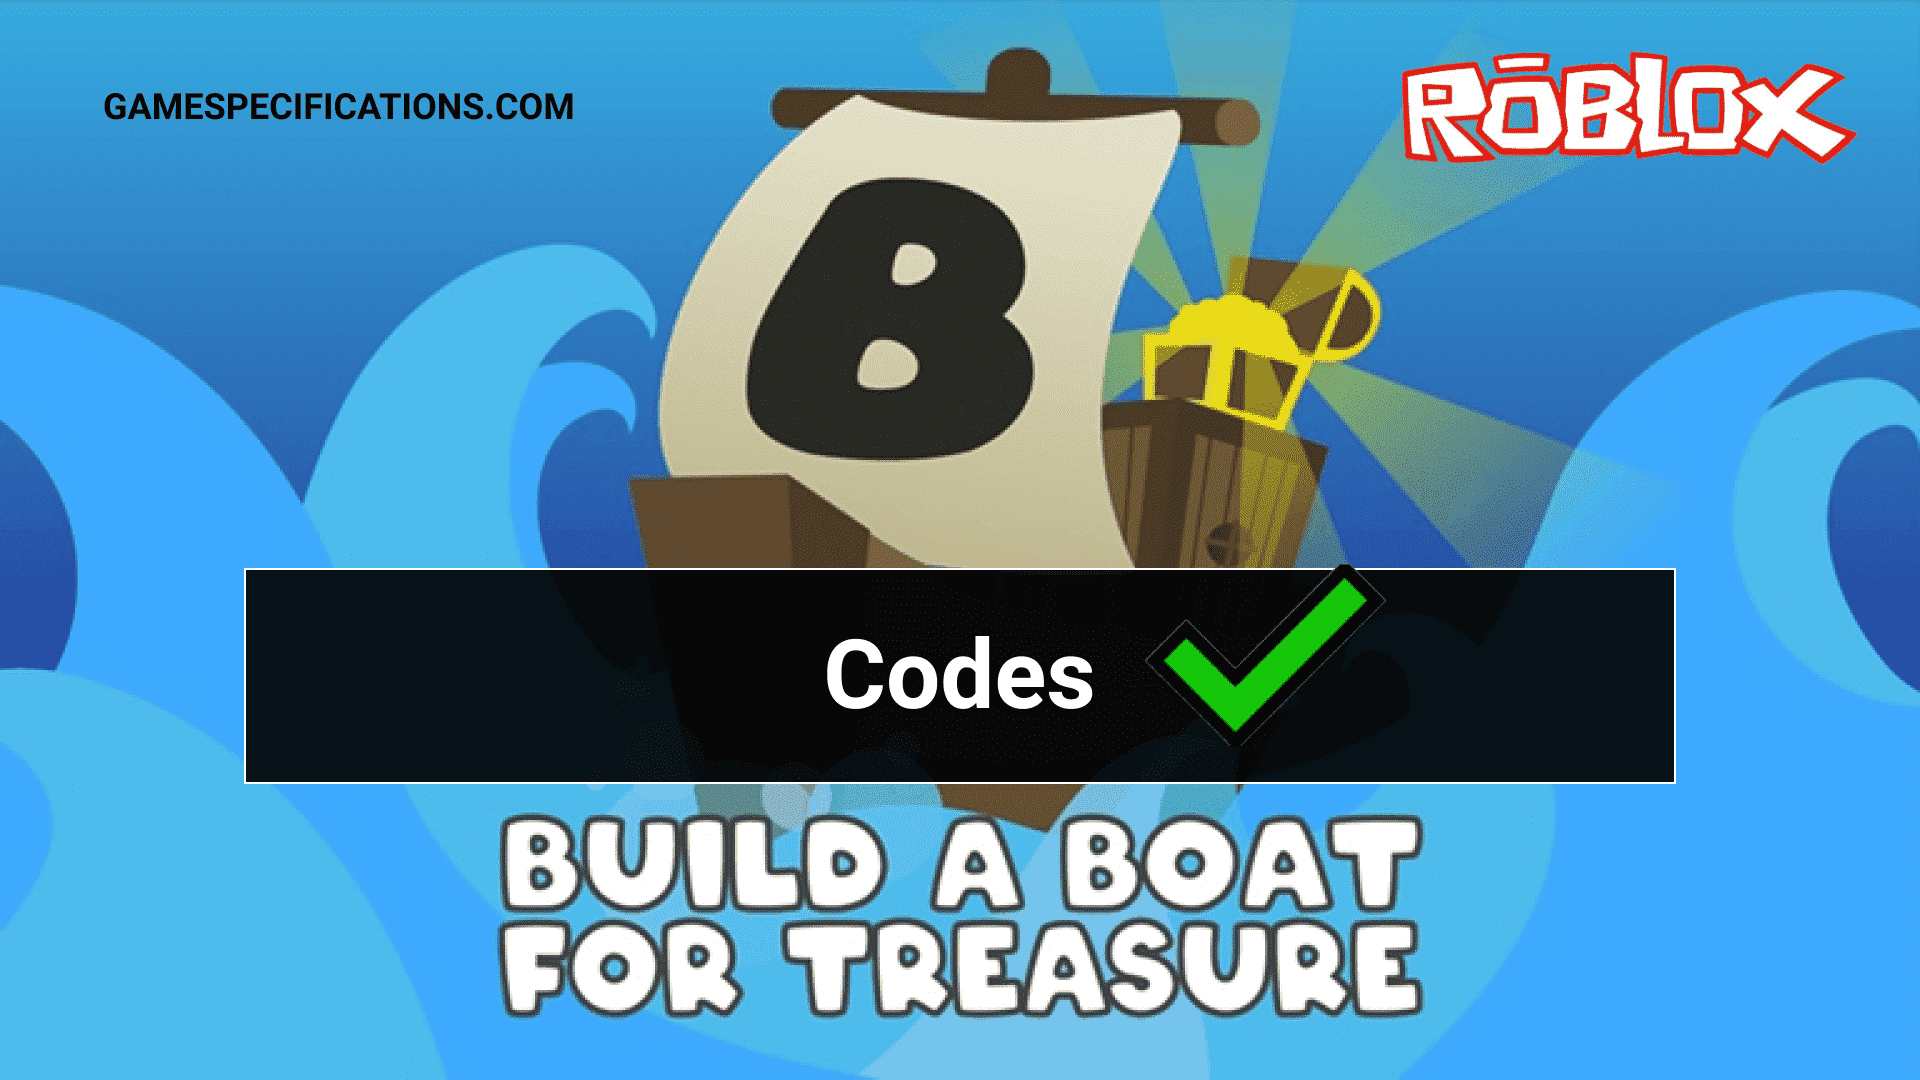 Roblox Build A Boat For Treasure Codes July 2021 Game Specifications - roblox 2021 build a boat